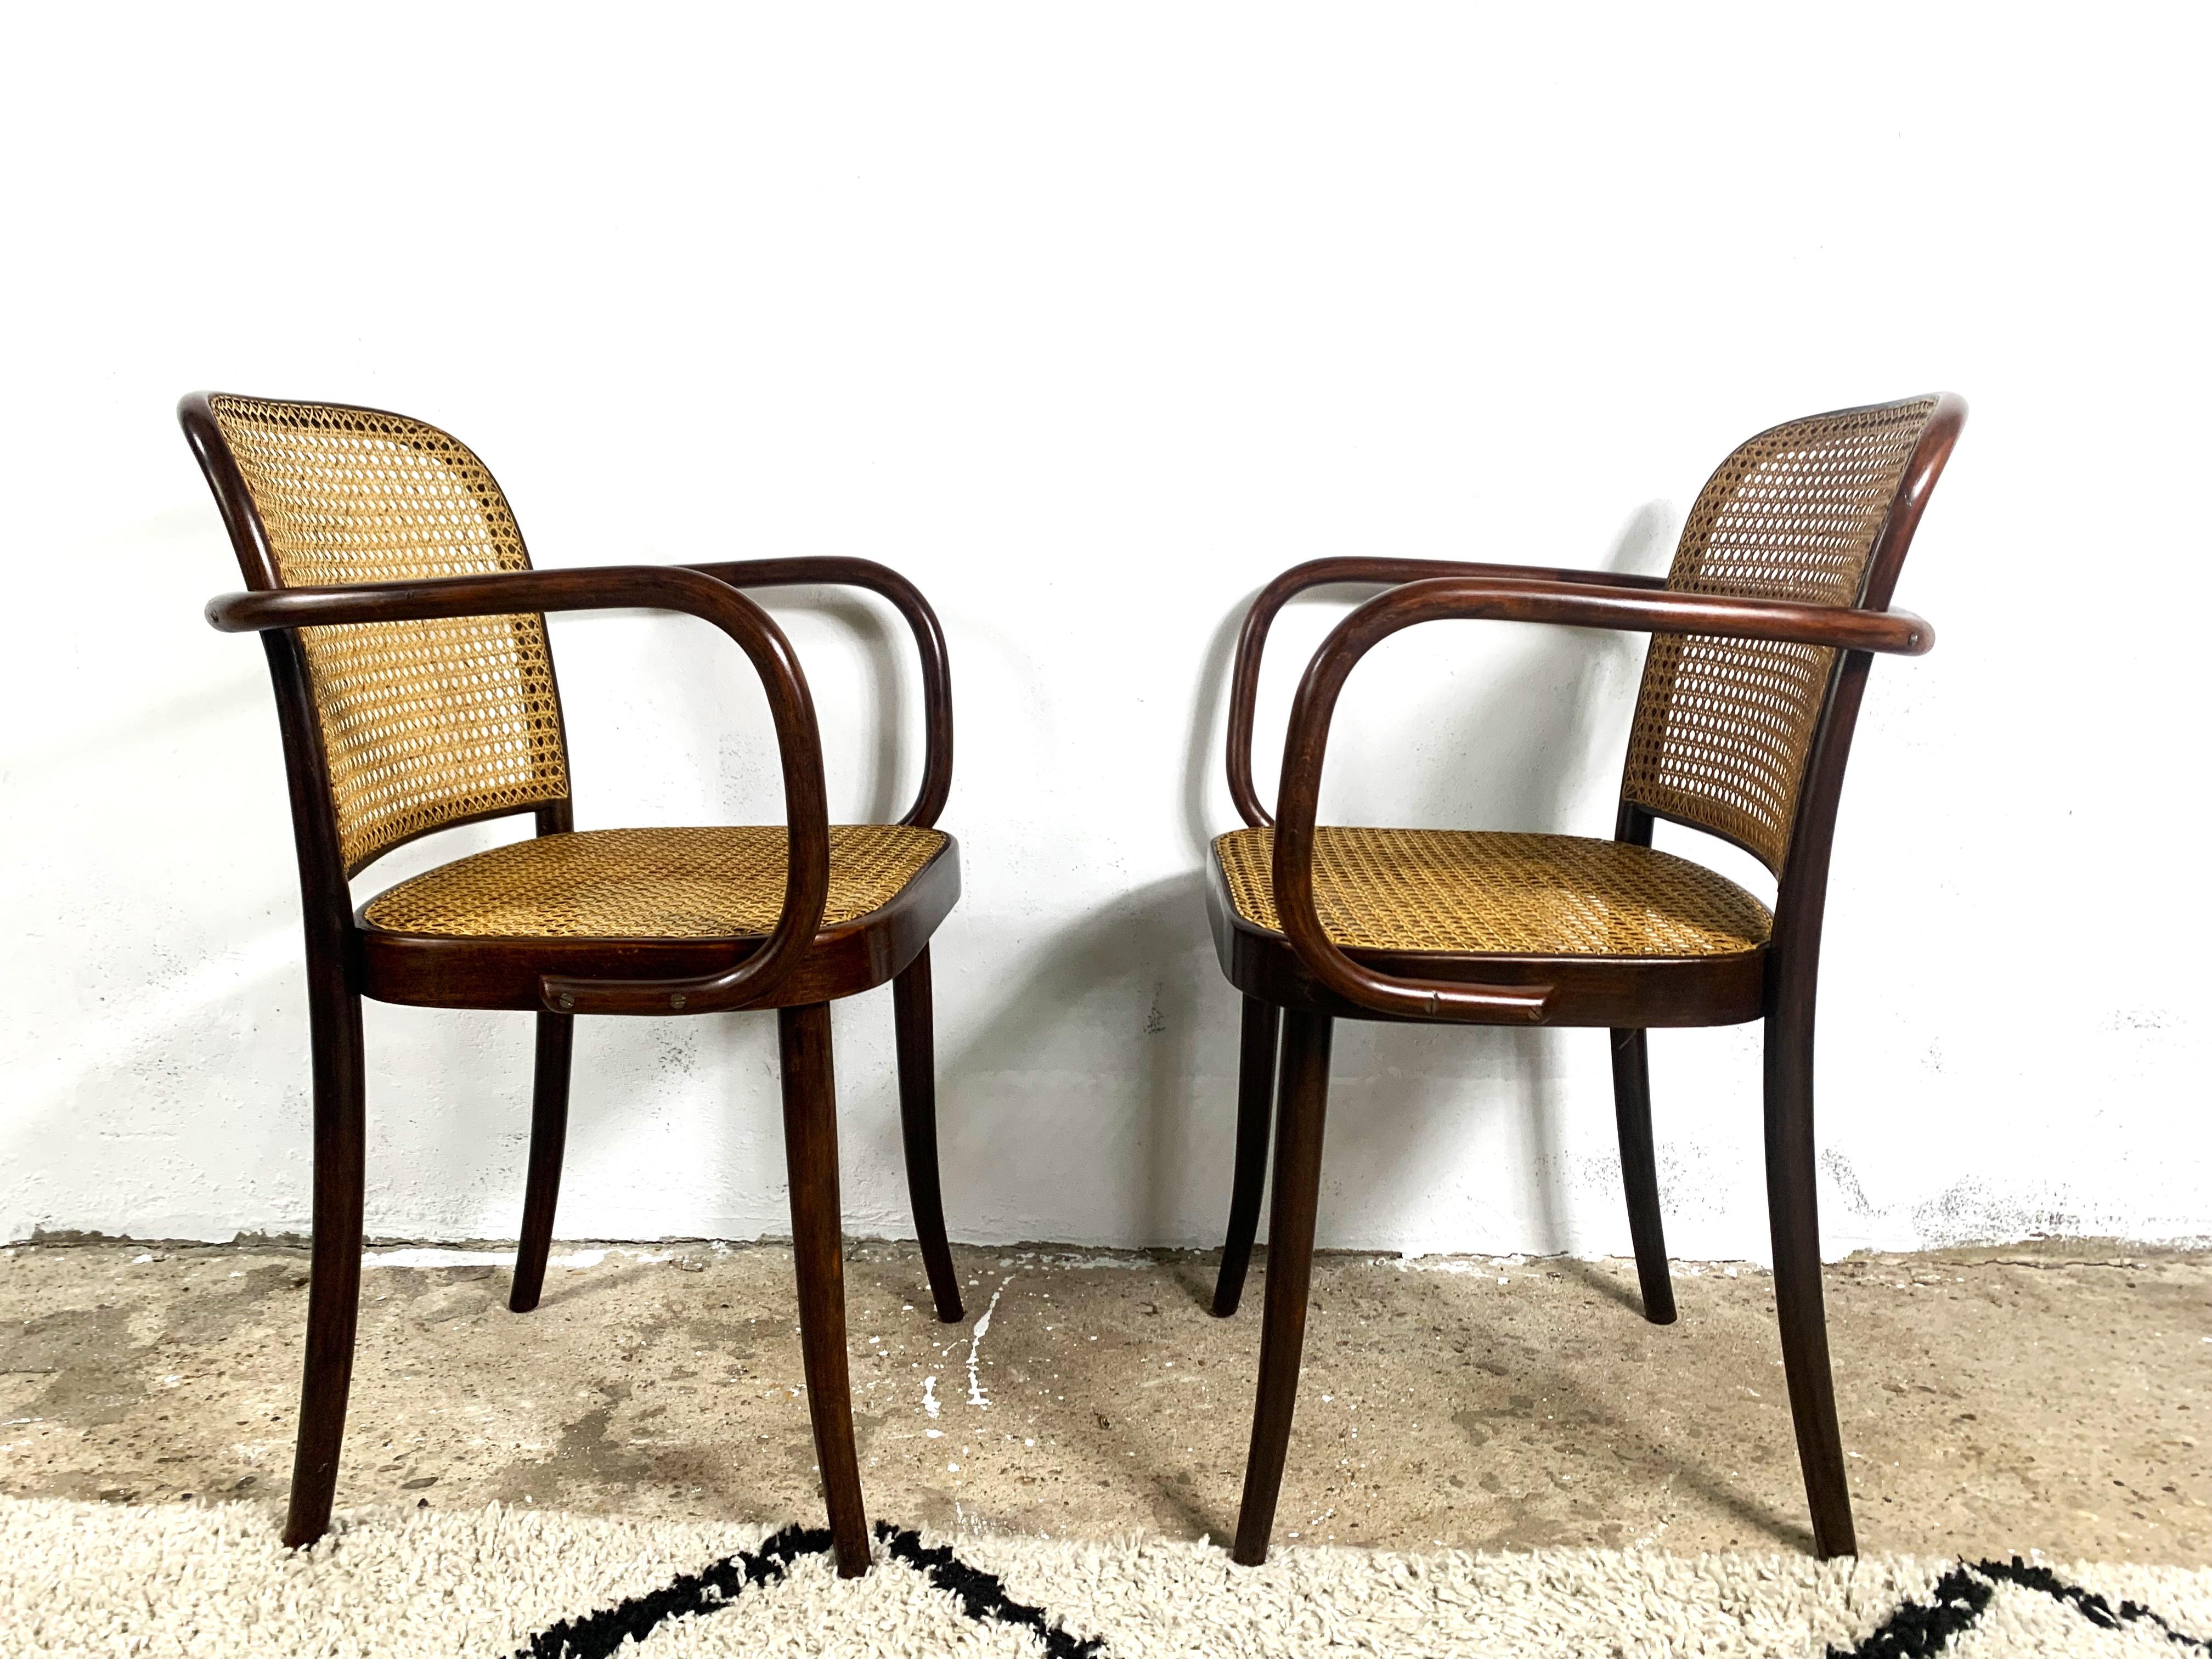 20th Century Thonet A811, 1930s, Rattan, Vintage - set of 2 For Sale